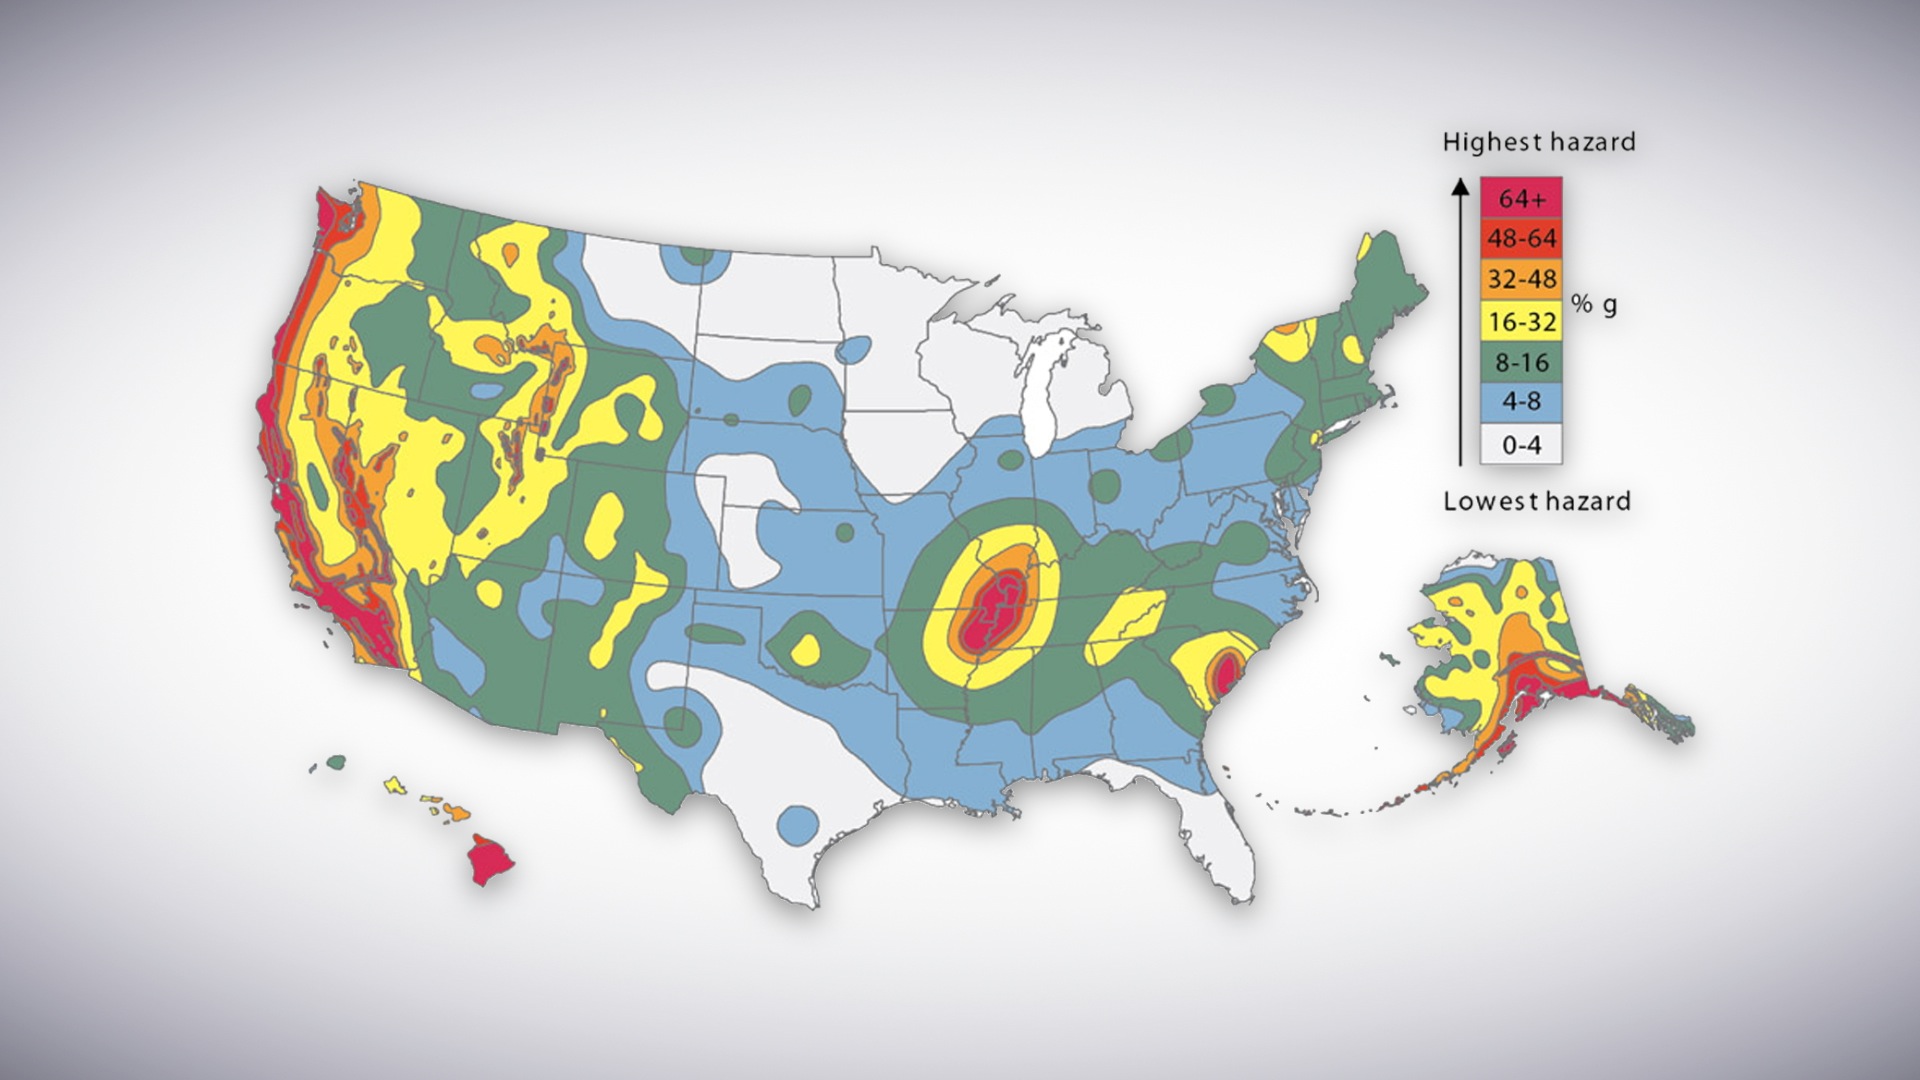 The USGS earthquake hazard map shows a high seismic threat level around the New Madrid fault. Researchers from the Kentucky Geological Survey say this threat is highly overstated.